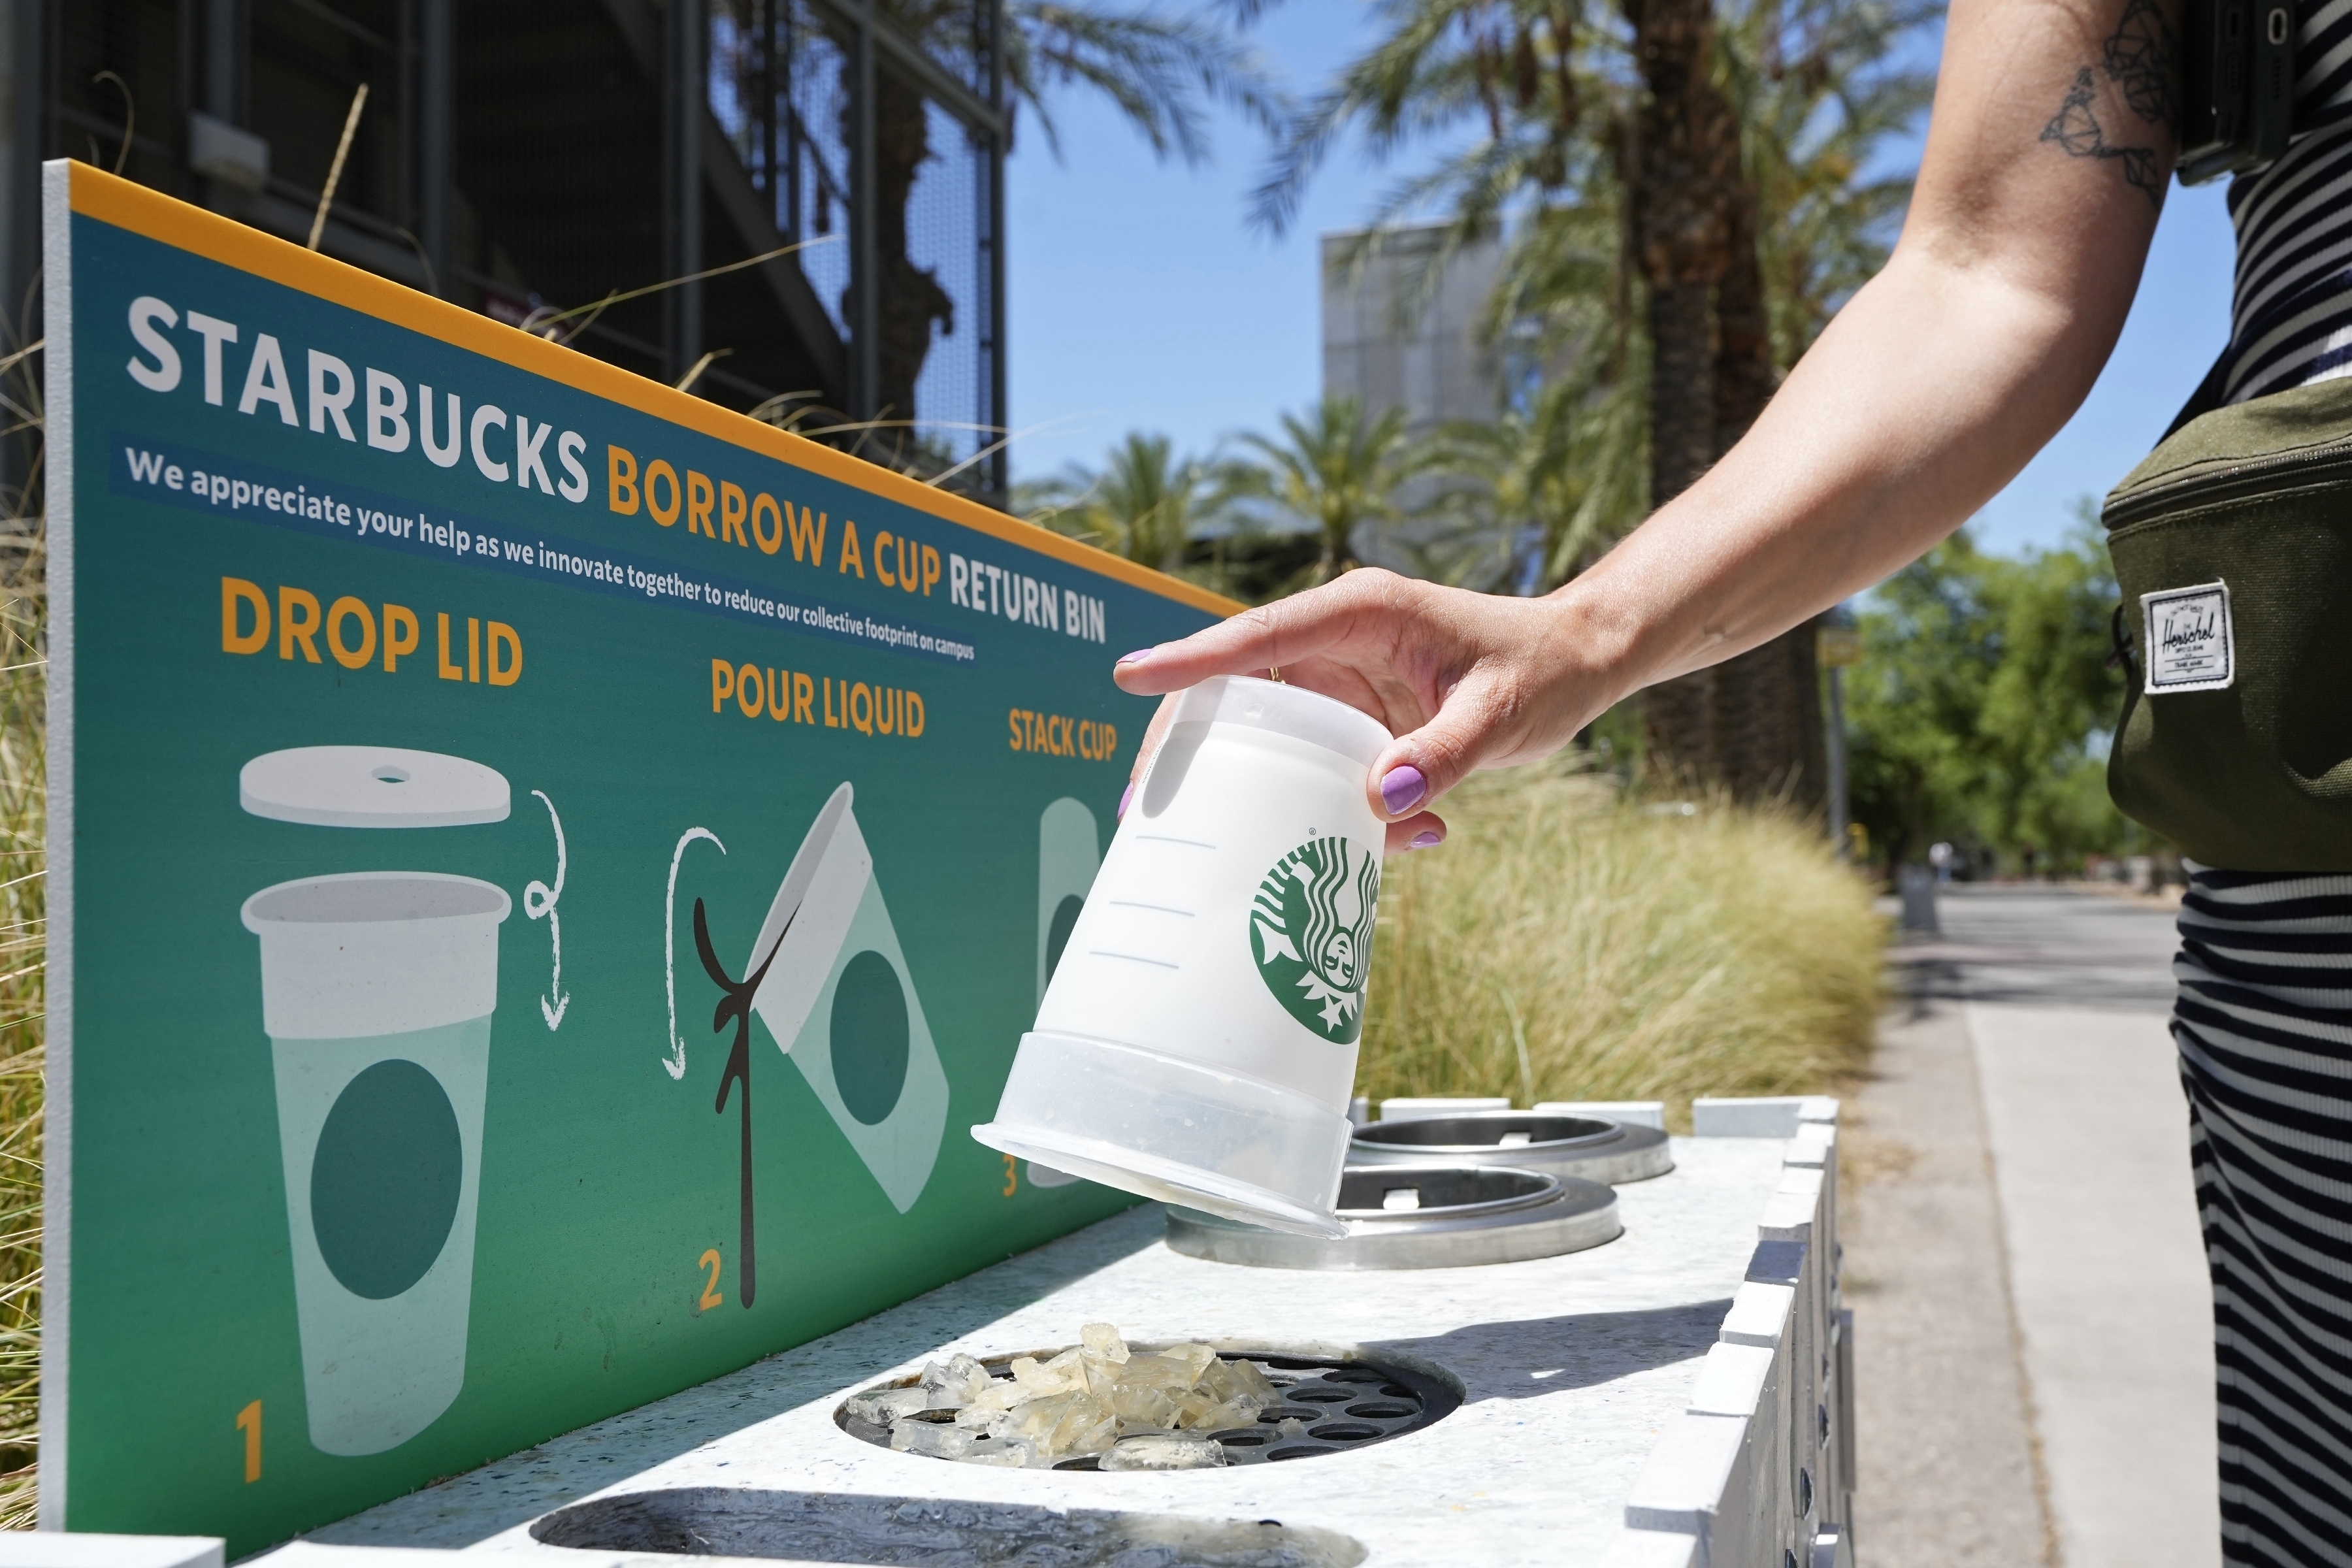 The Starbucks Cup, Sustainability Move 